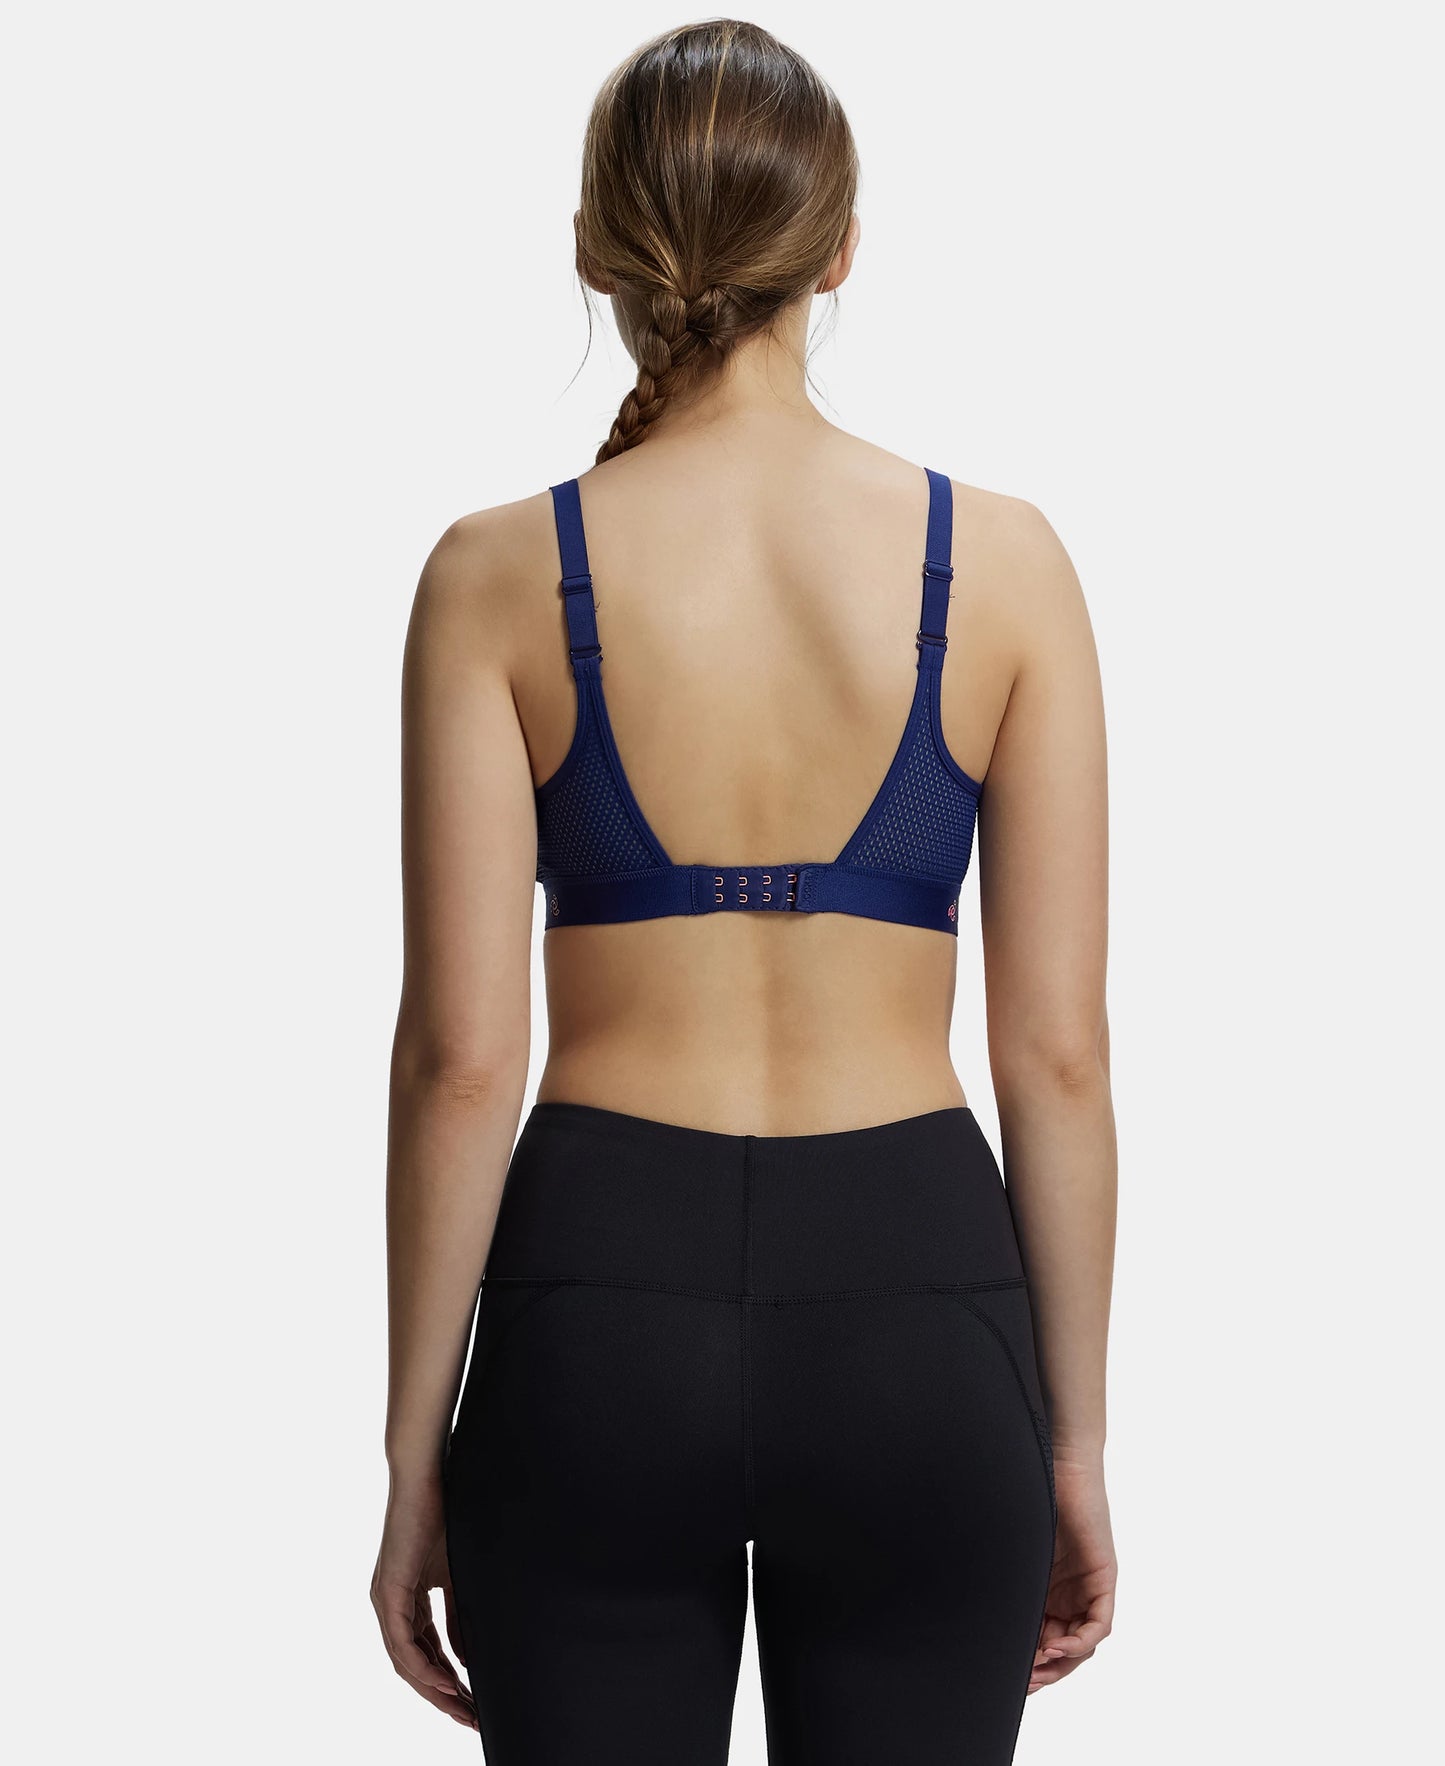 Wirefree Padded Tactel Nylon Elastane Stretch Full Coverage Sports Bra with Optional Cross Back Styling - Midnight Sail